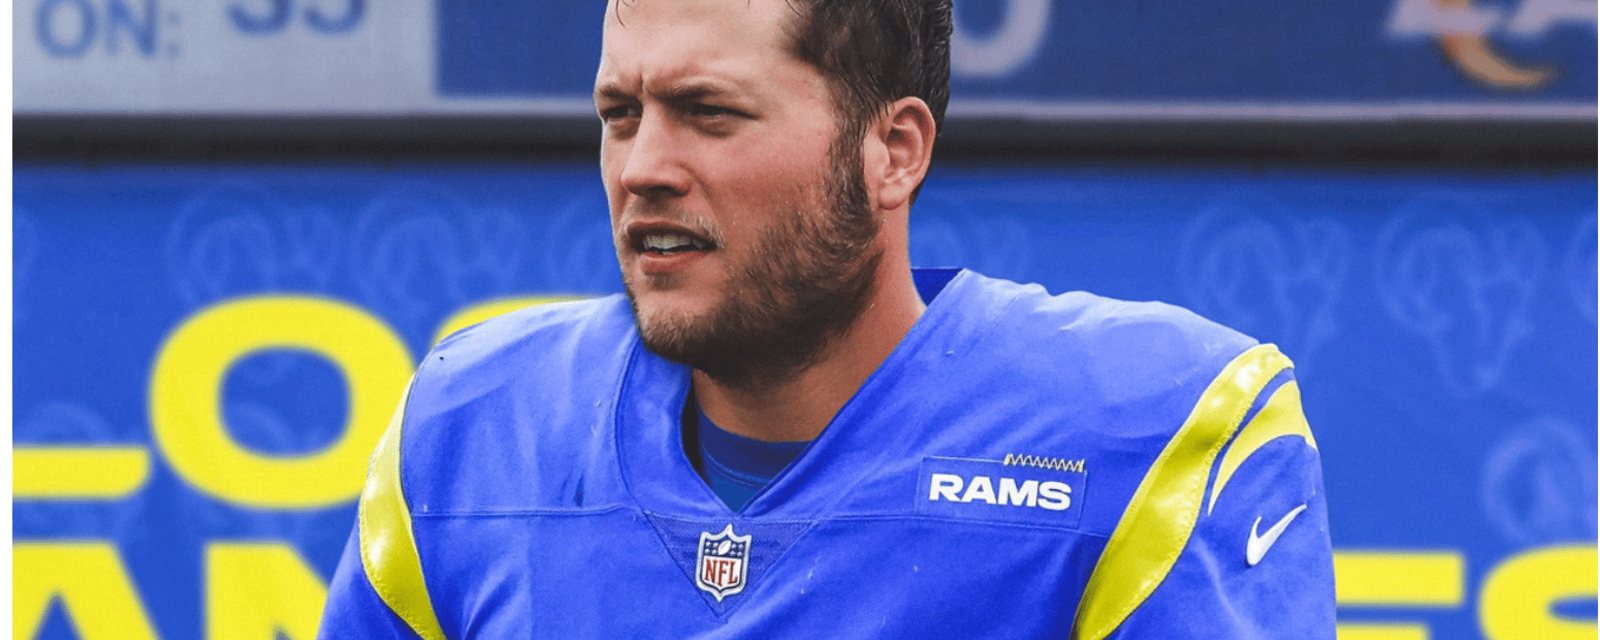 The worst is confirmed for Matthew Stafford 